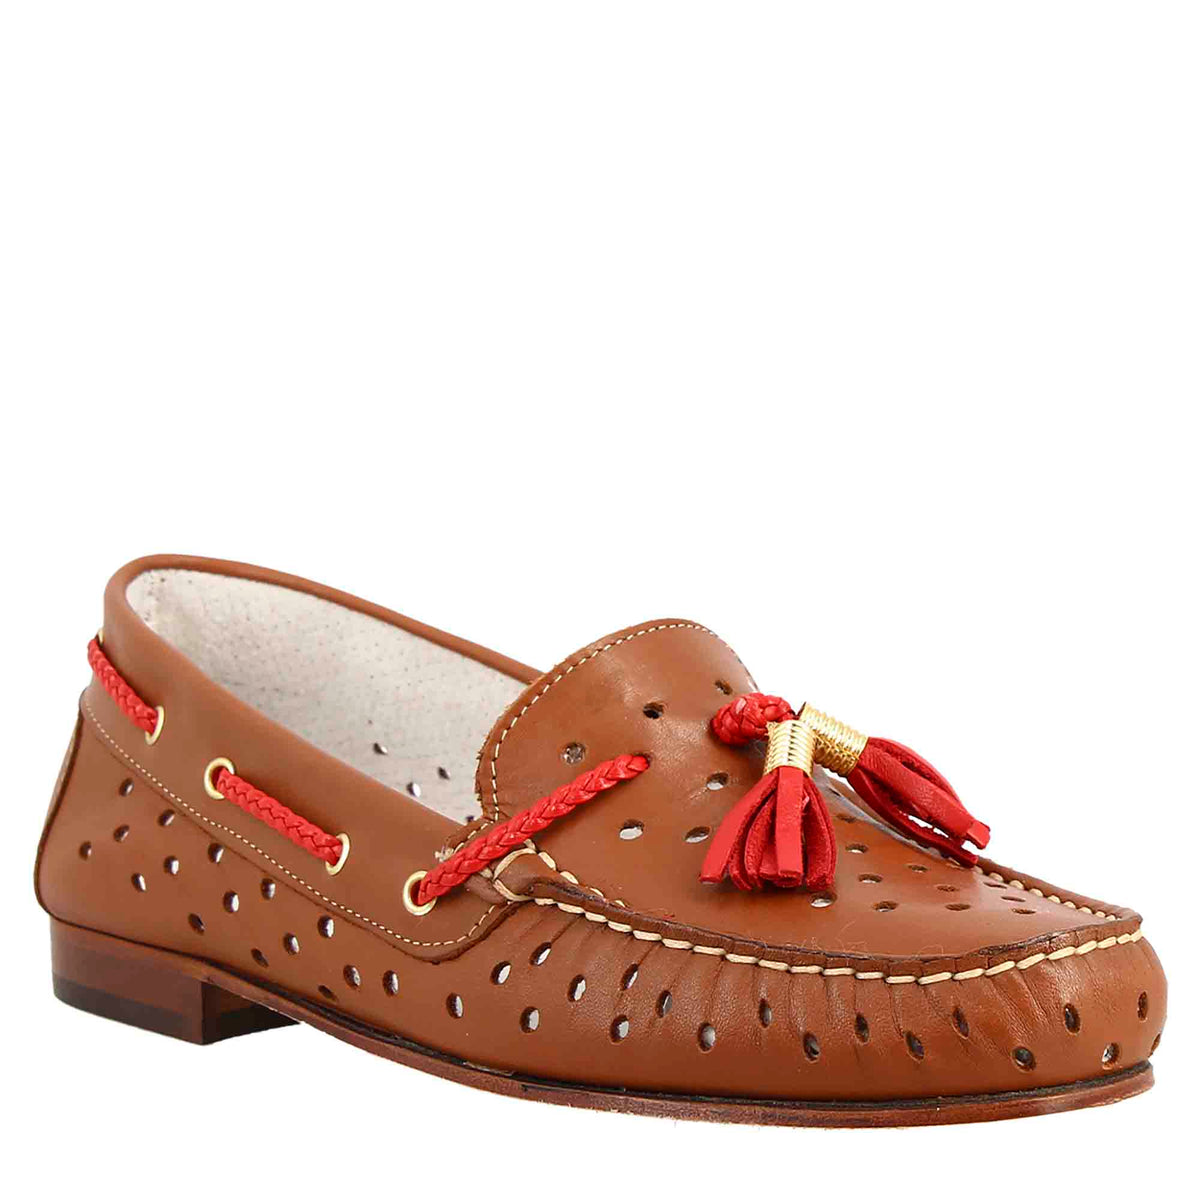 Classic women's loafers handmade in perforated brown leather 